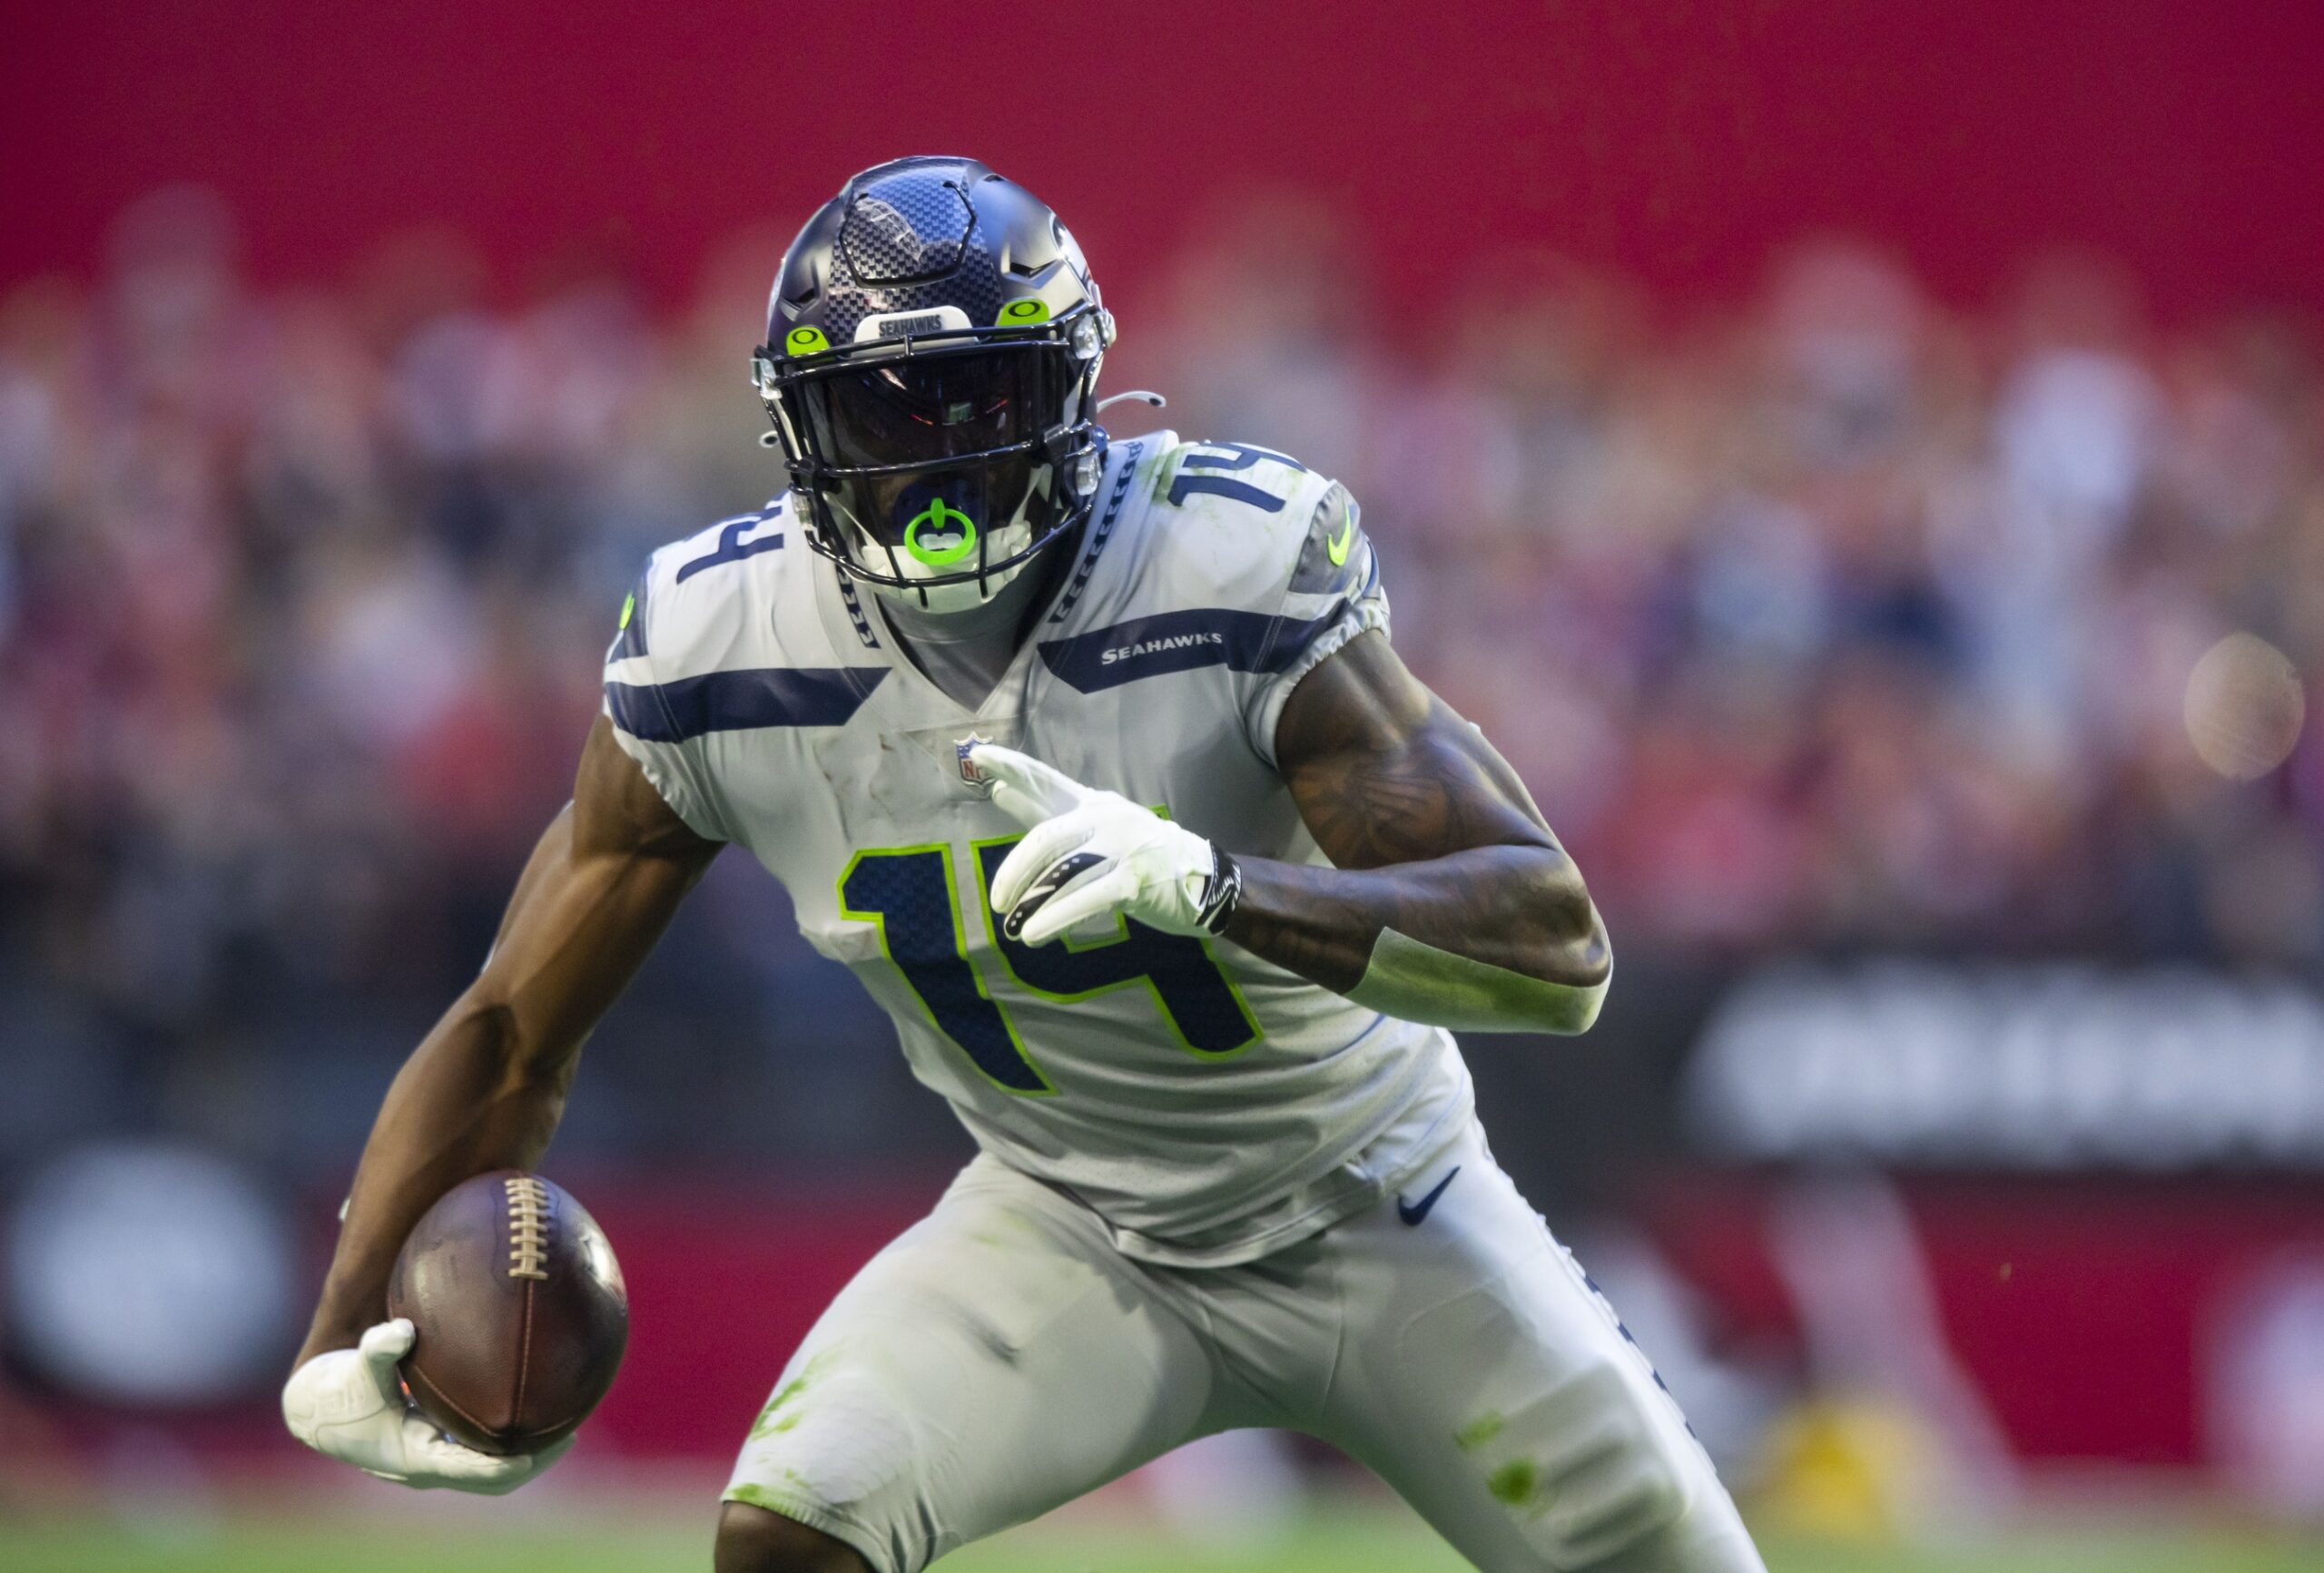 Seahawk DK Metcalf says he's 100% ready to play Week 1 against Bengals